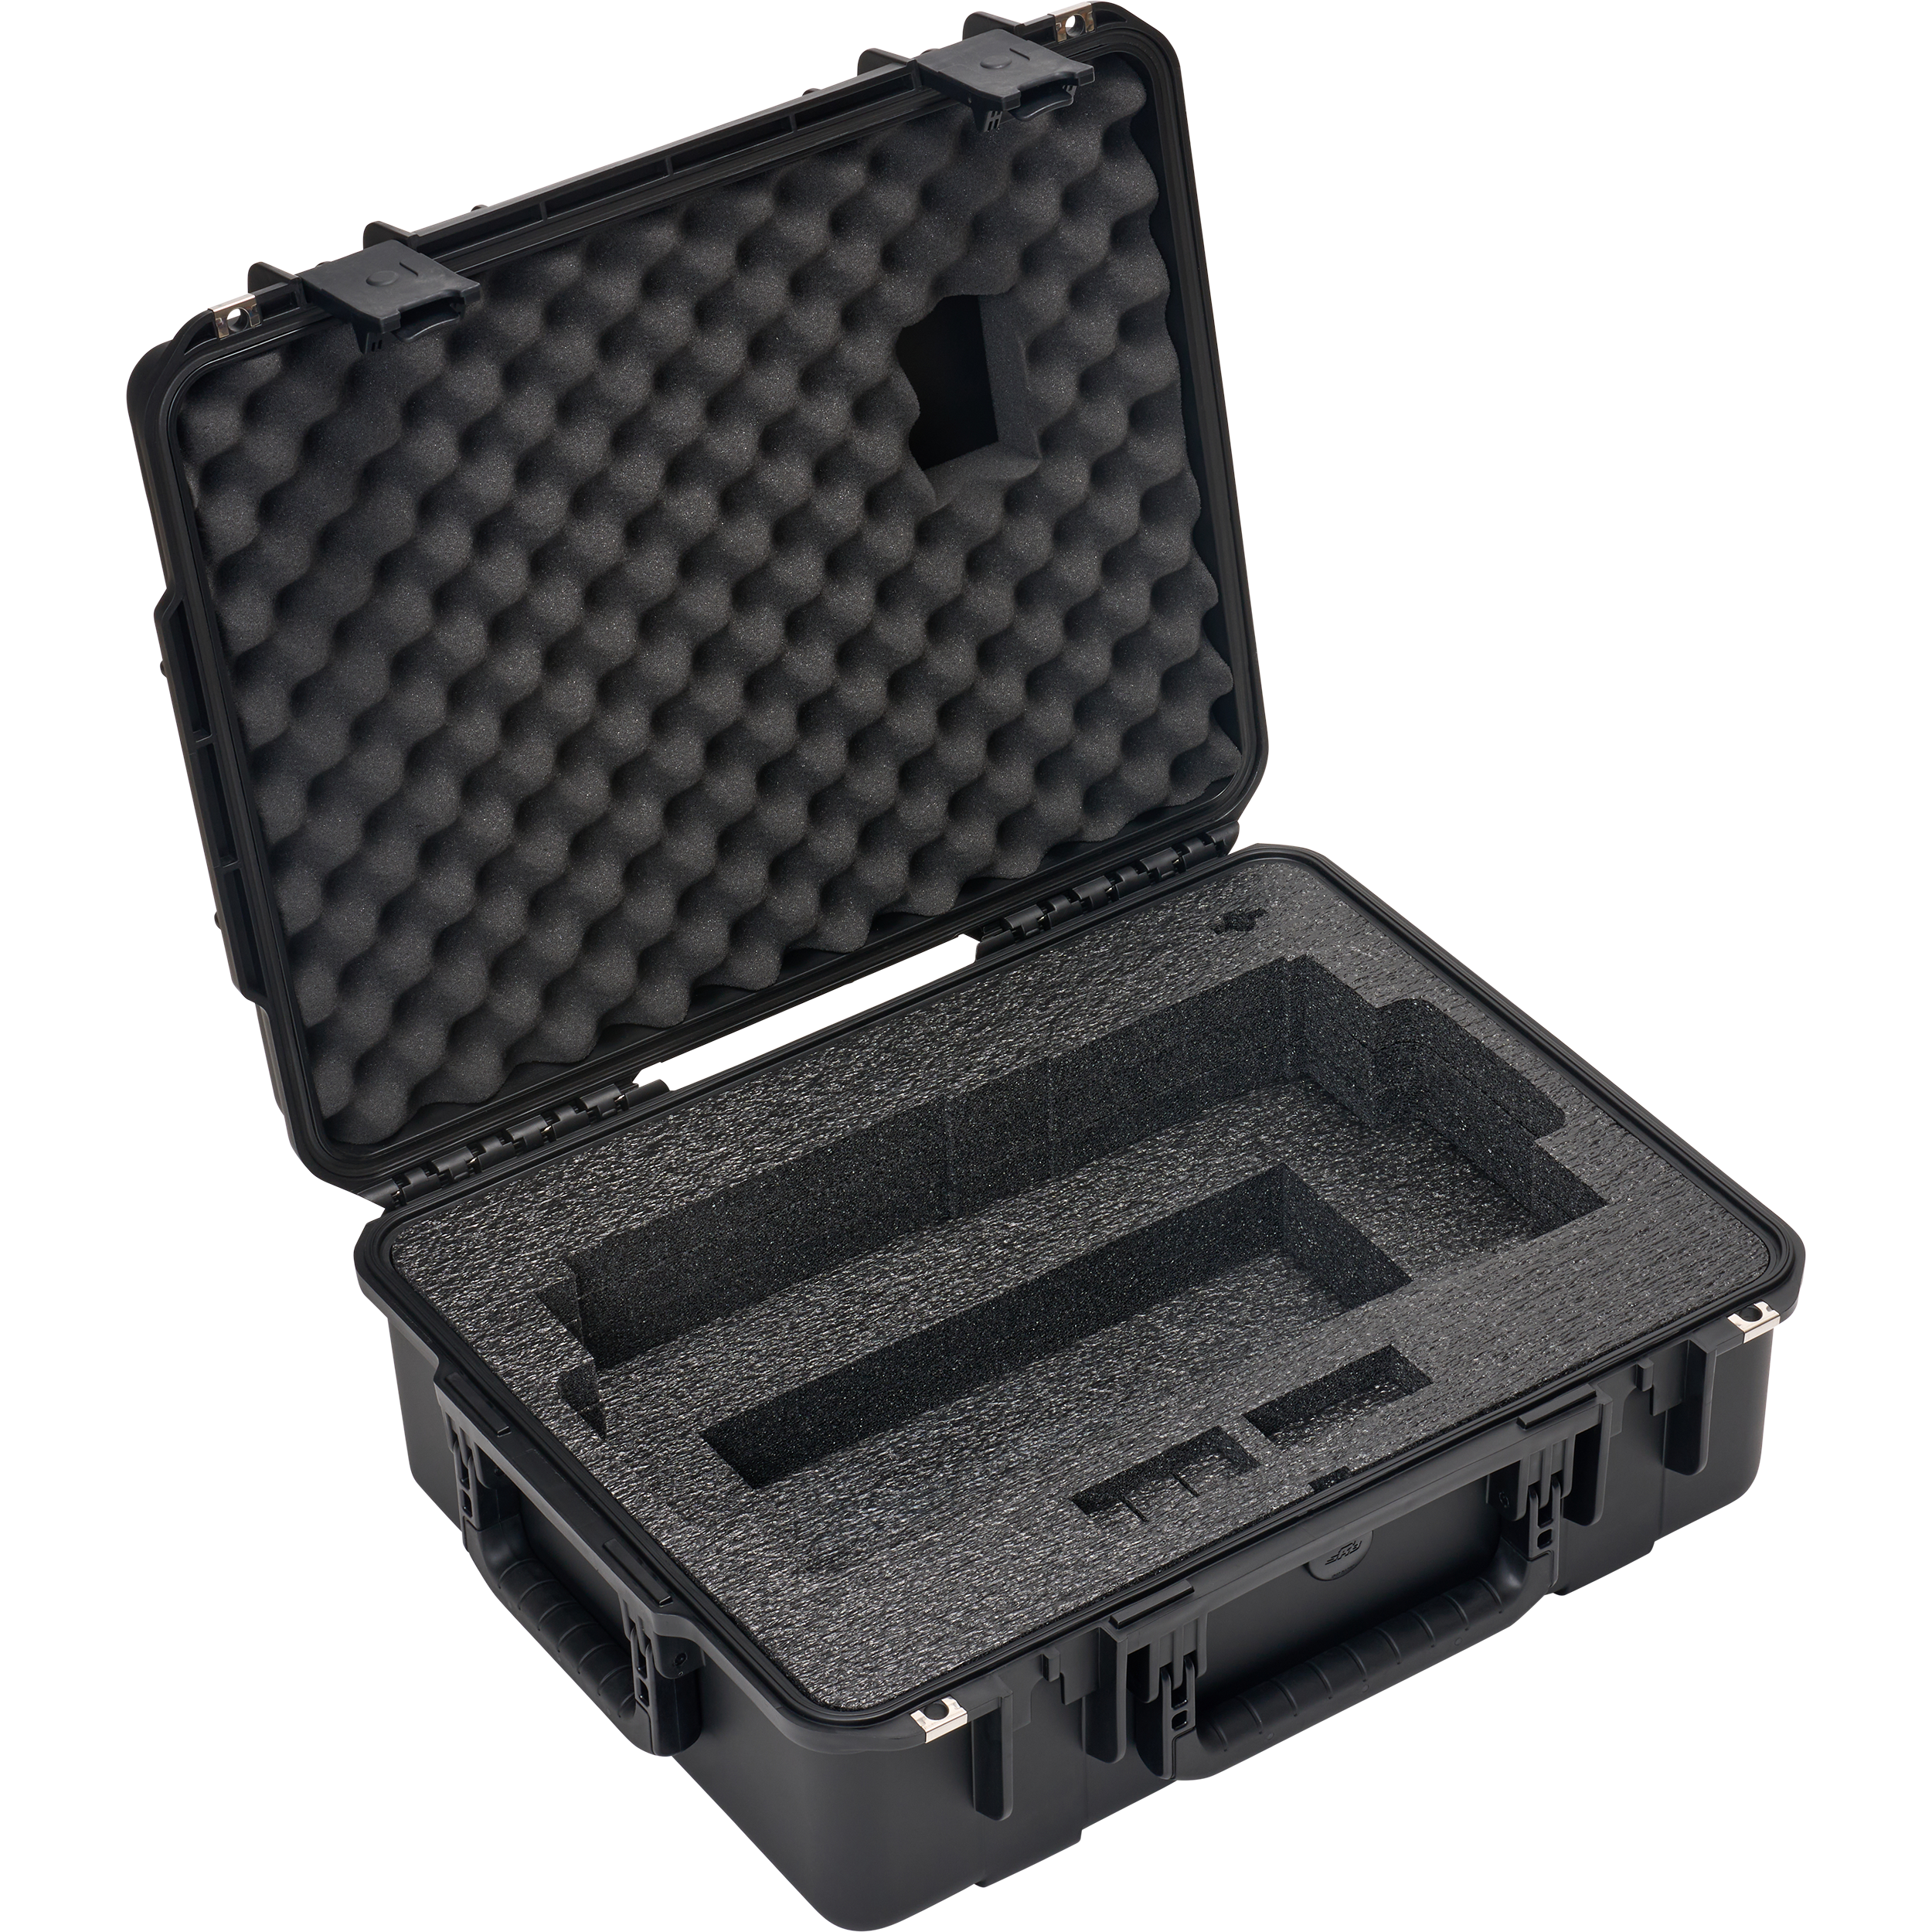 BYFP ipCase for Roland V-160HD